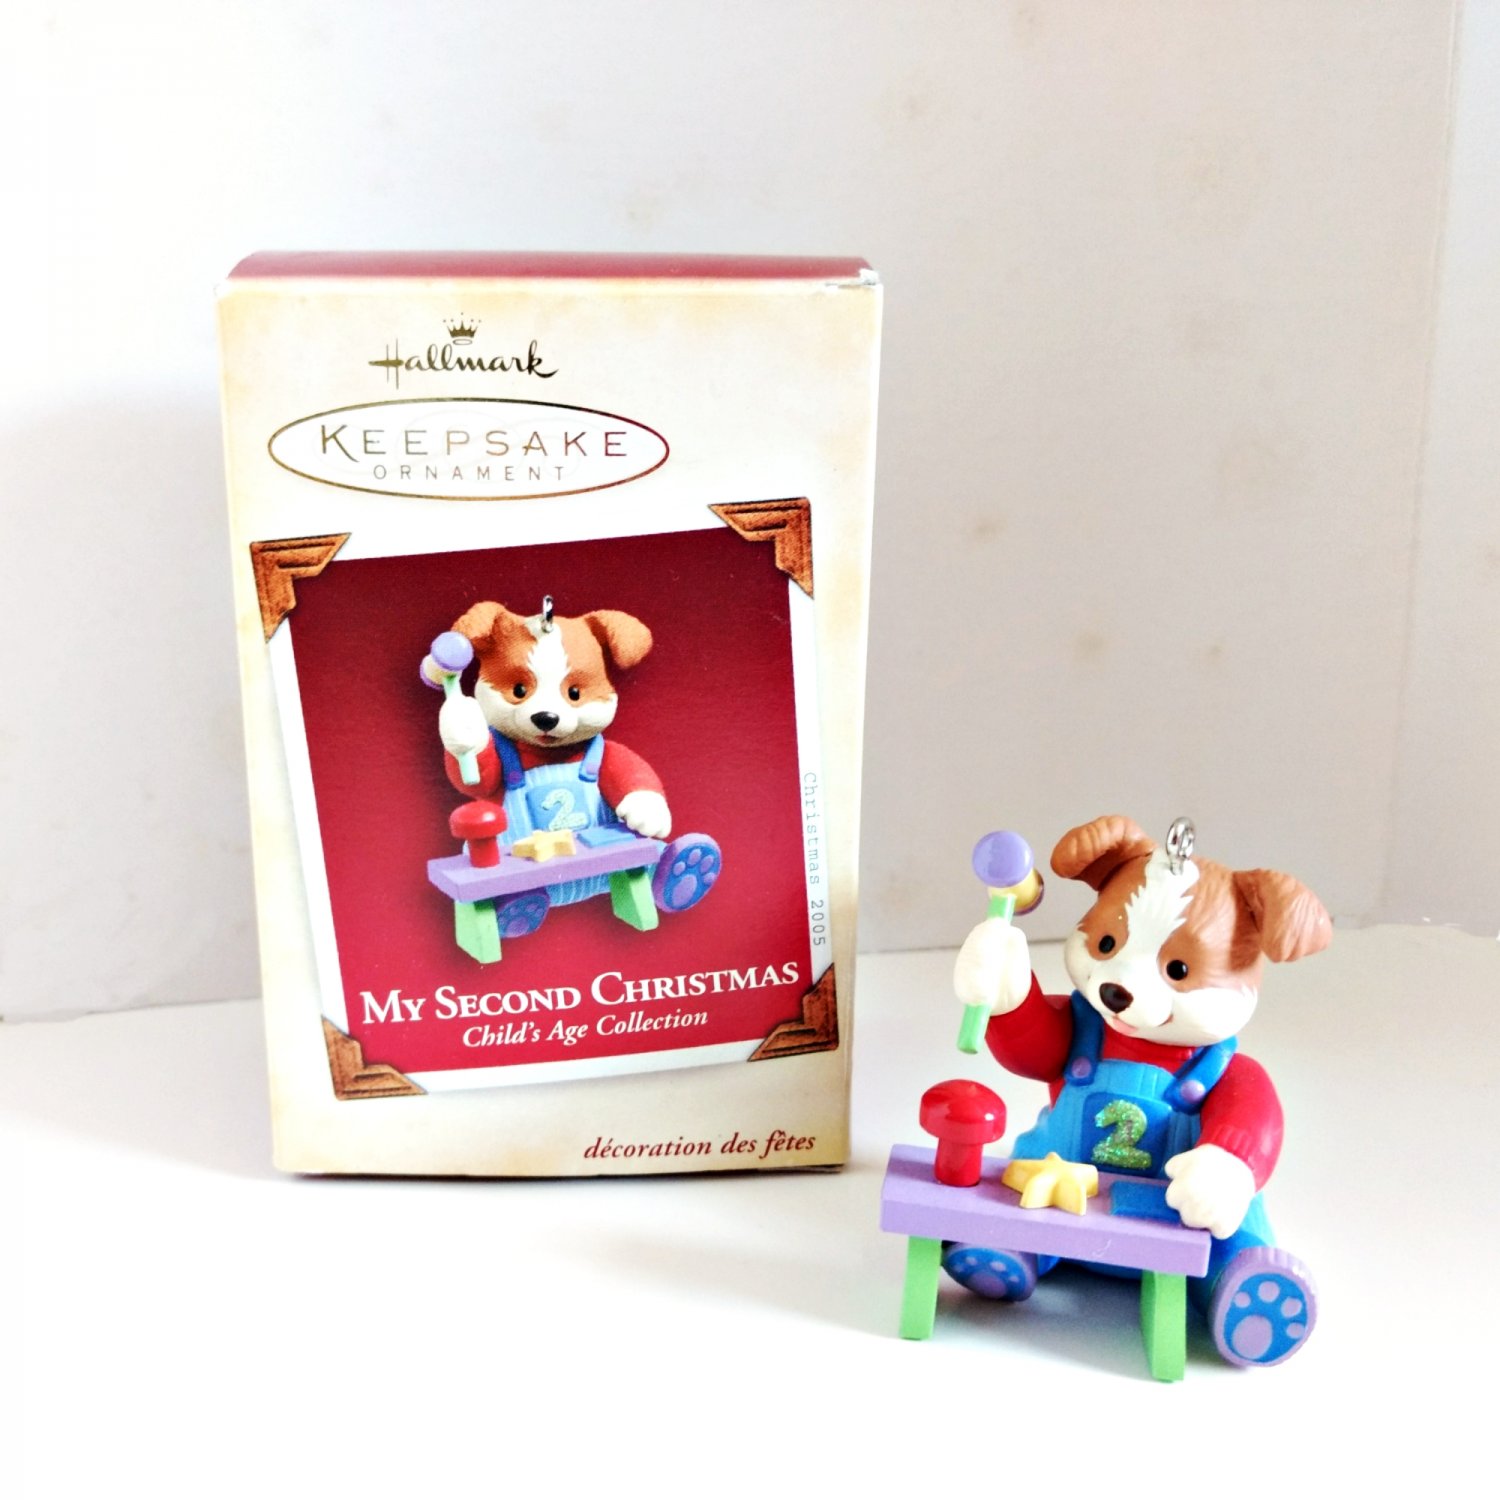 My Second Christmas Childs Age Collection Hallmark Baby Boy 2005 Puppy